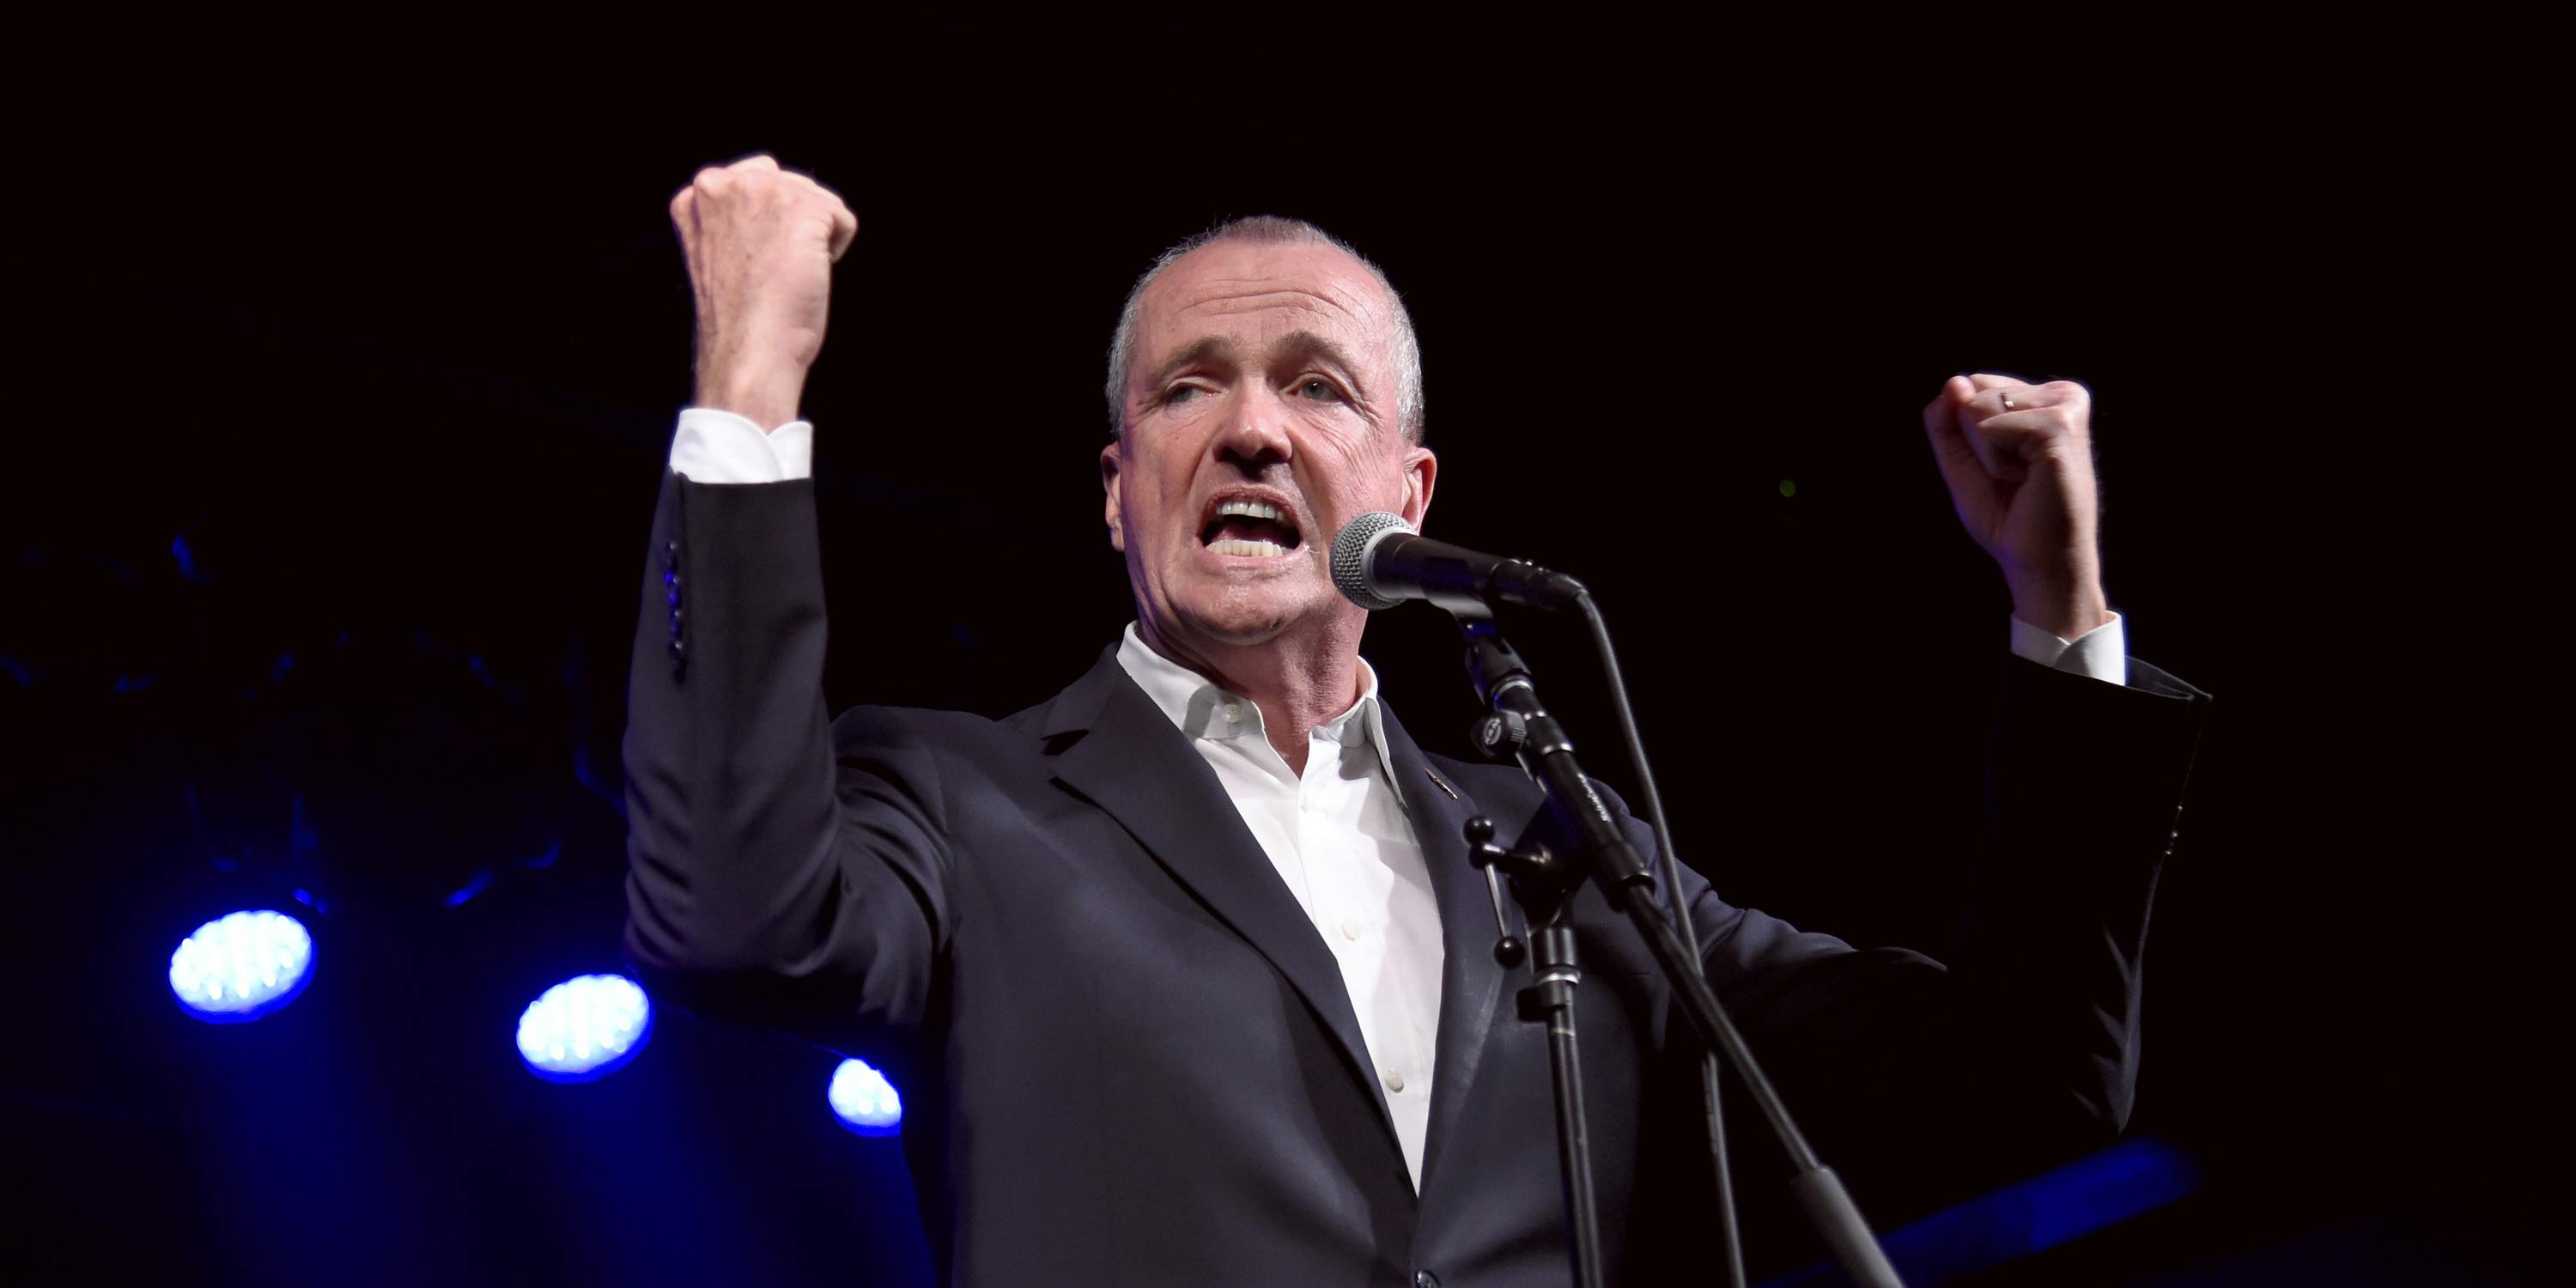 ASBURY PARK, NJ - JUNE 18: Governor of New Jersey Phil Murphy speaks onstage during the Grand Re-Opening of Asbury Lanes at Asbury Lanes on June 18, 2018 in Asbury Park, New Jersey. Murphy has been a vocal advocate of recreational marijuana legalization. His Attorney General recently ordered a stay on marijuana prosecutions until September.